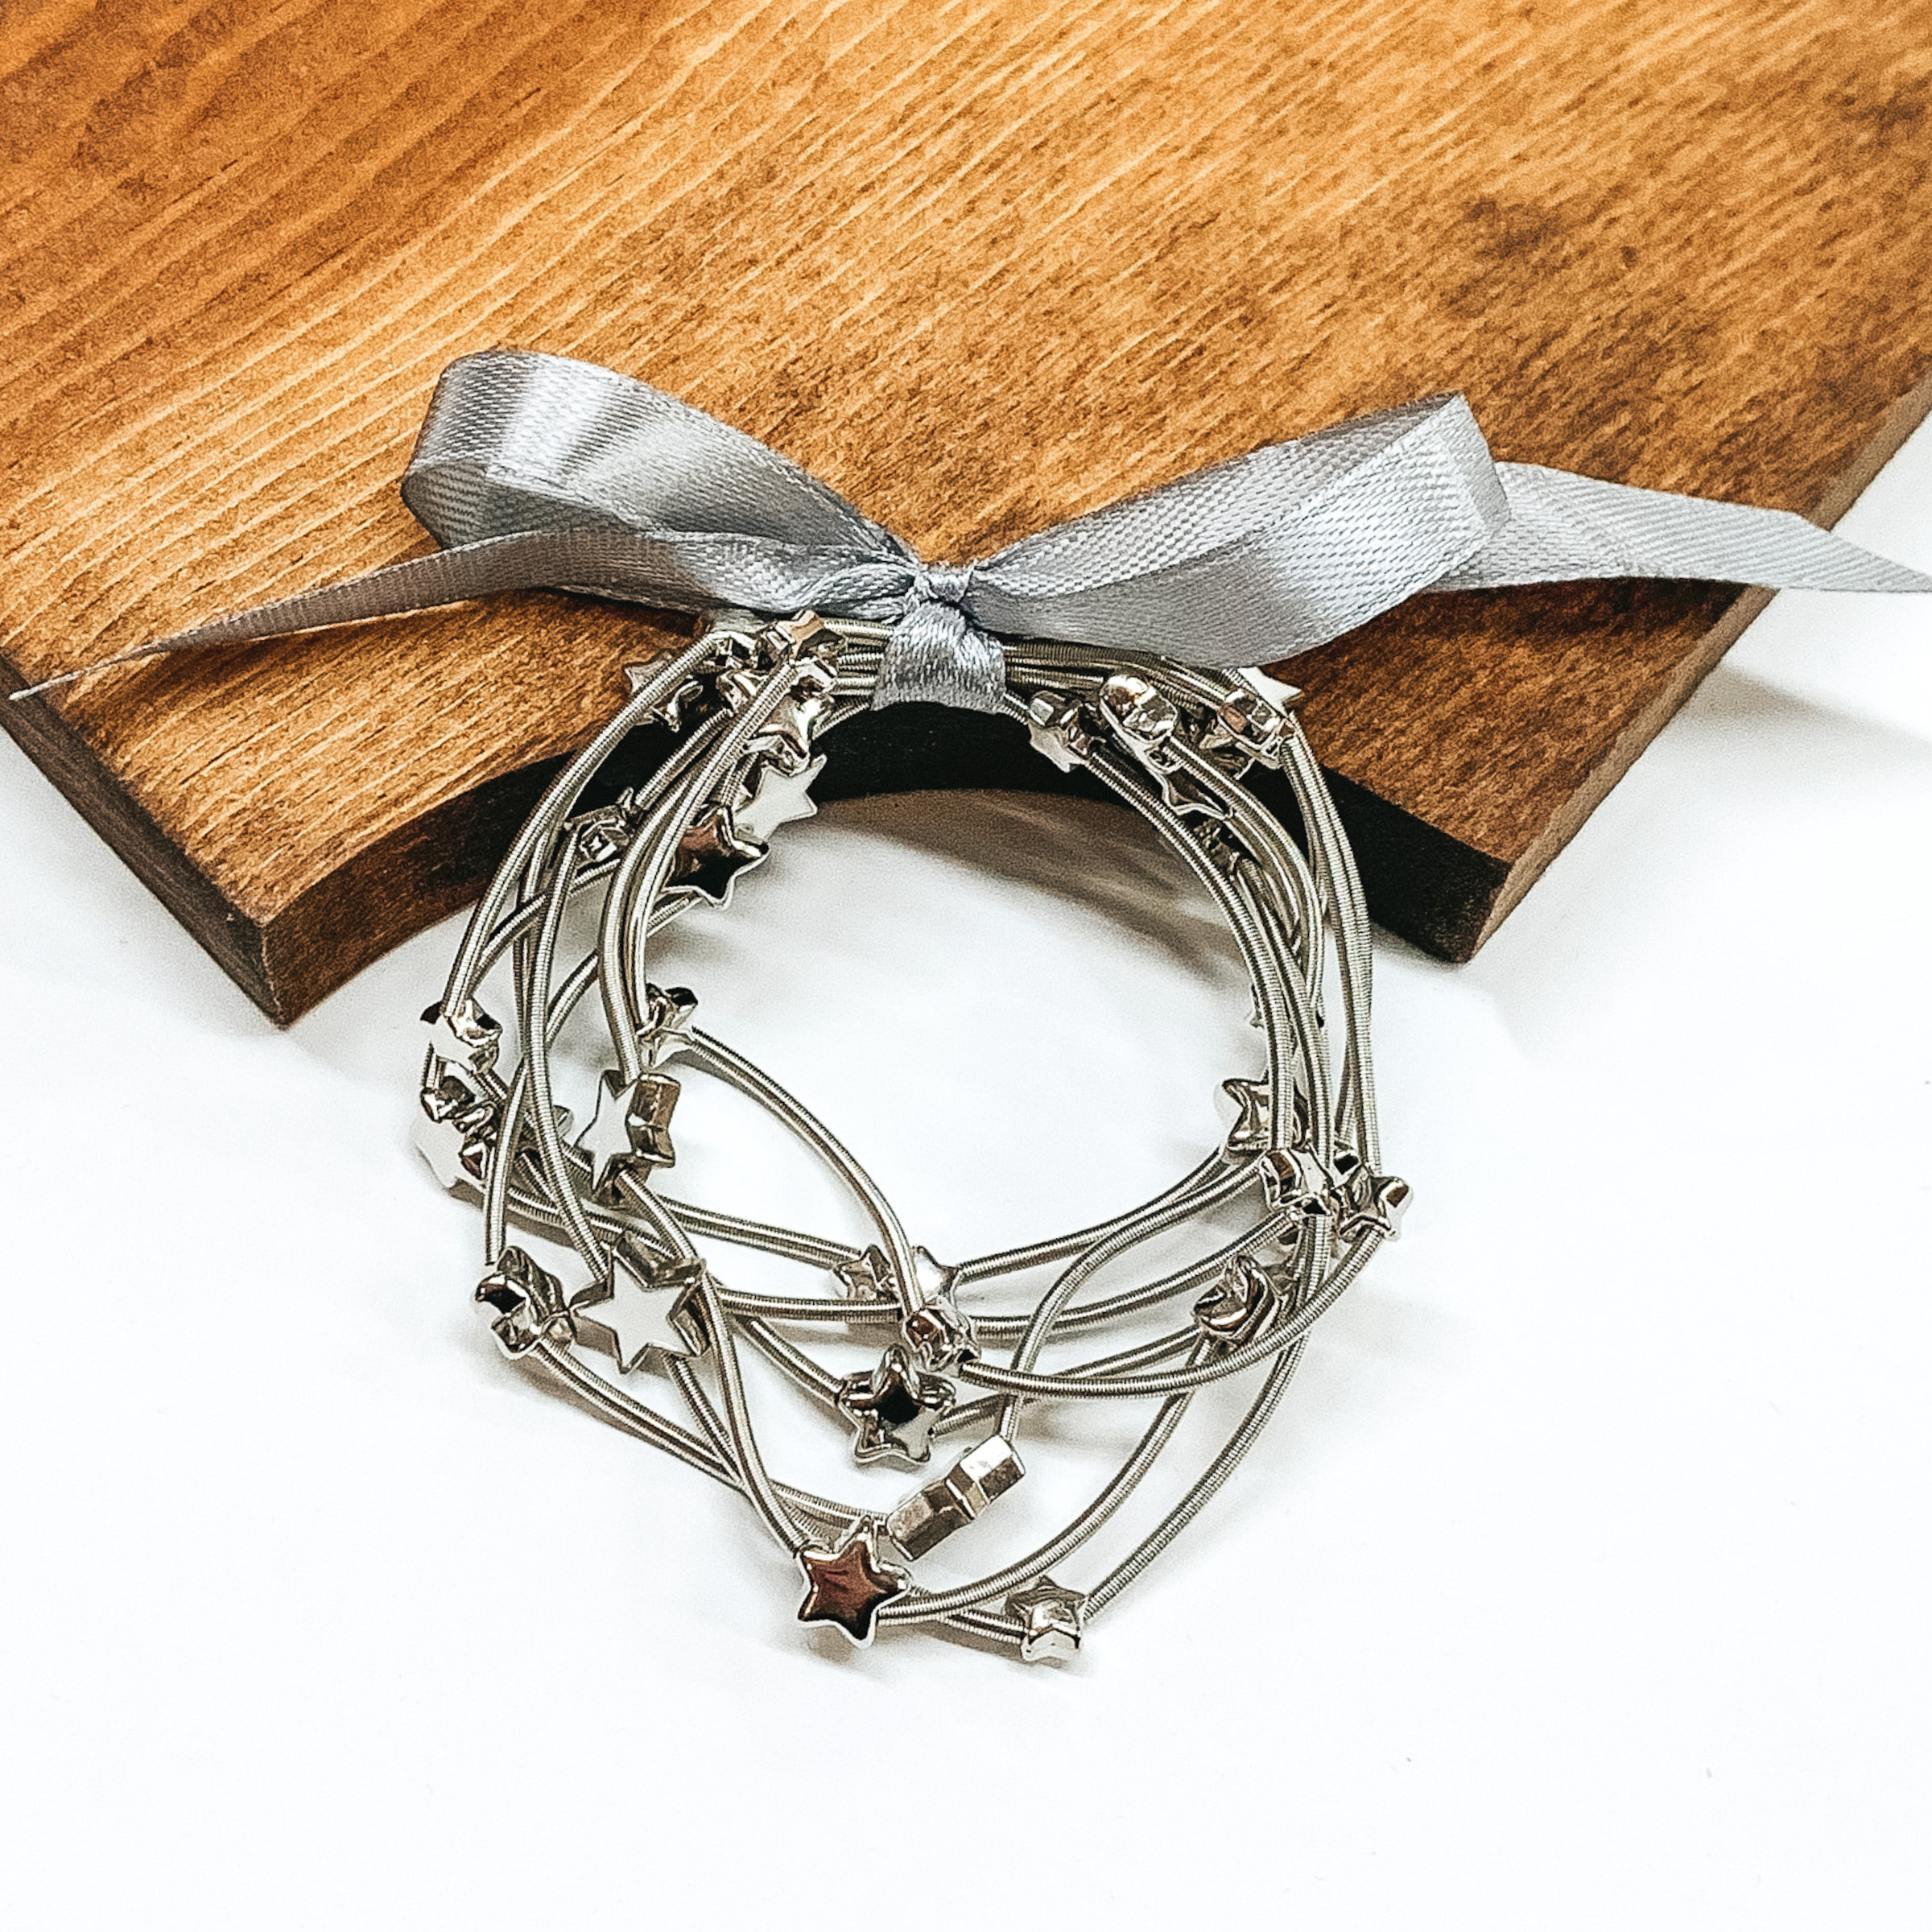 Group of silver spring wire elastic bracelet set tied together with a silver ribbon that is tied in a bow. All of the bracelets have small silver star beads. This bracelet set is pictured laying next on a piece of wood on a white background.